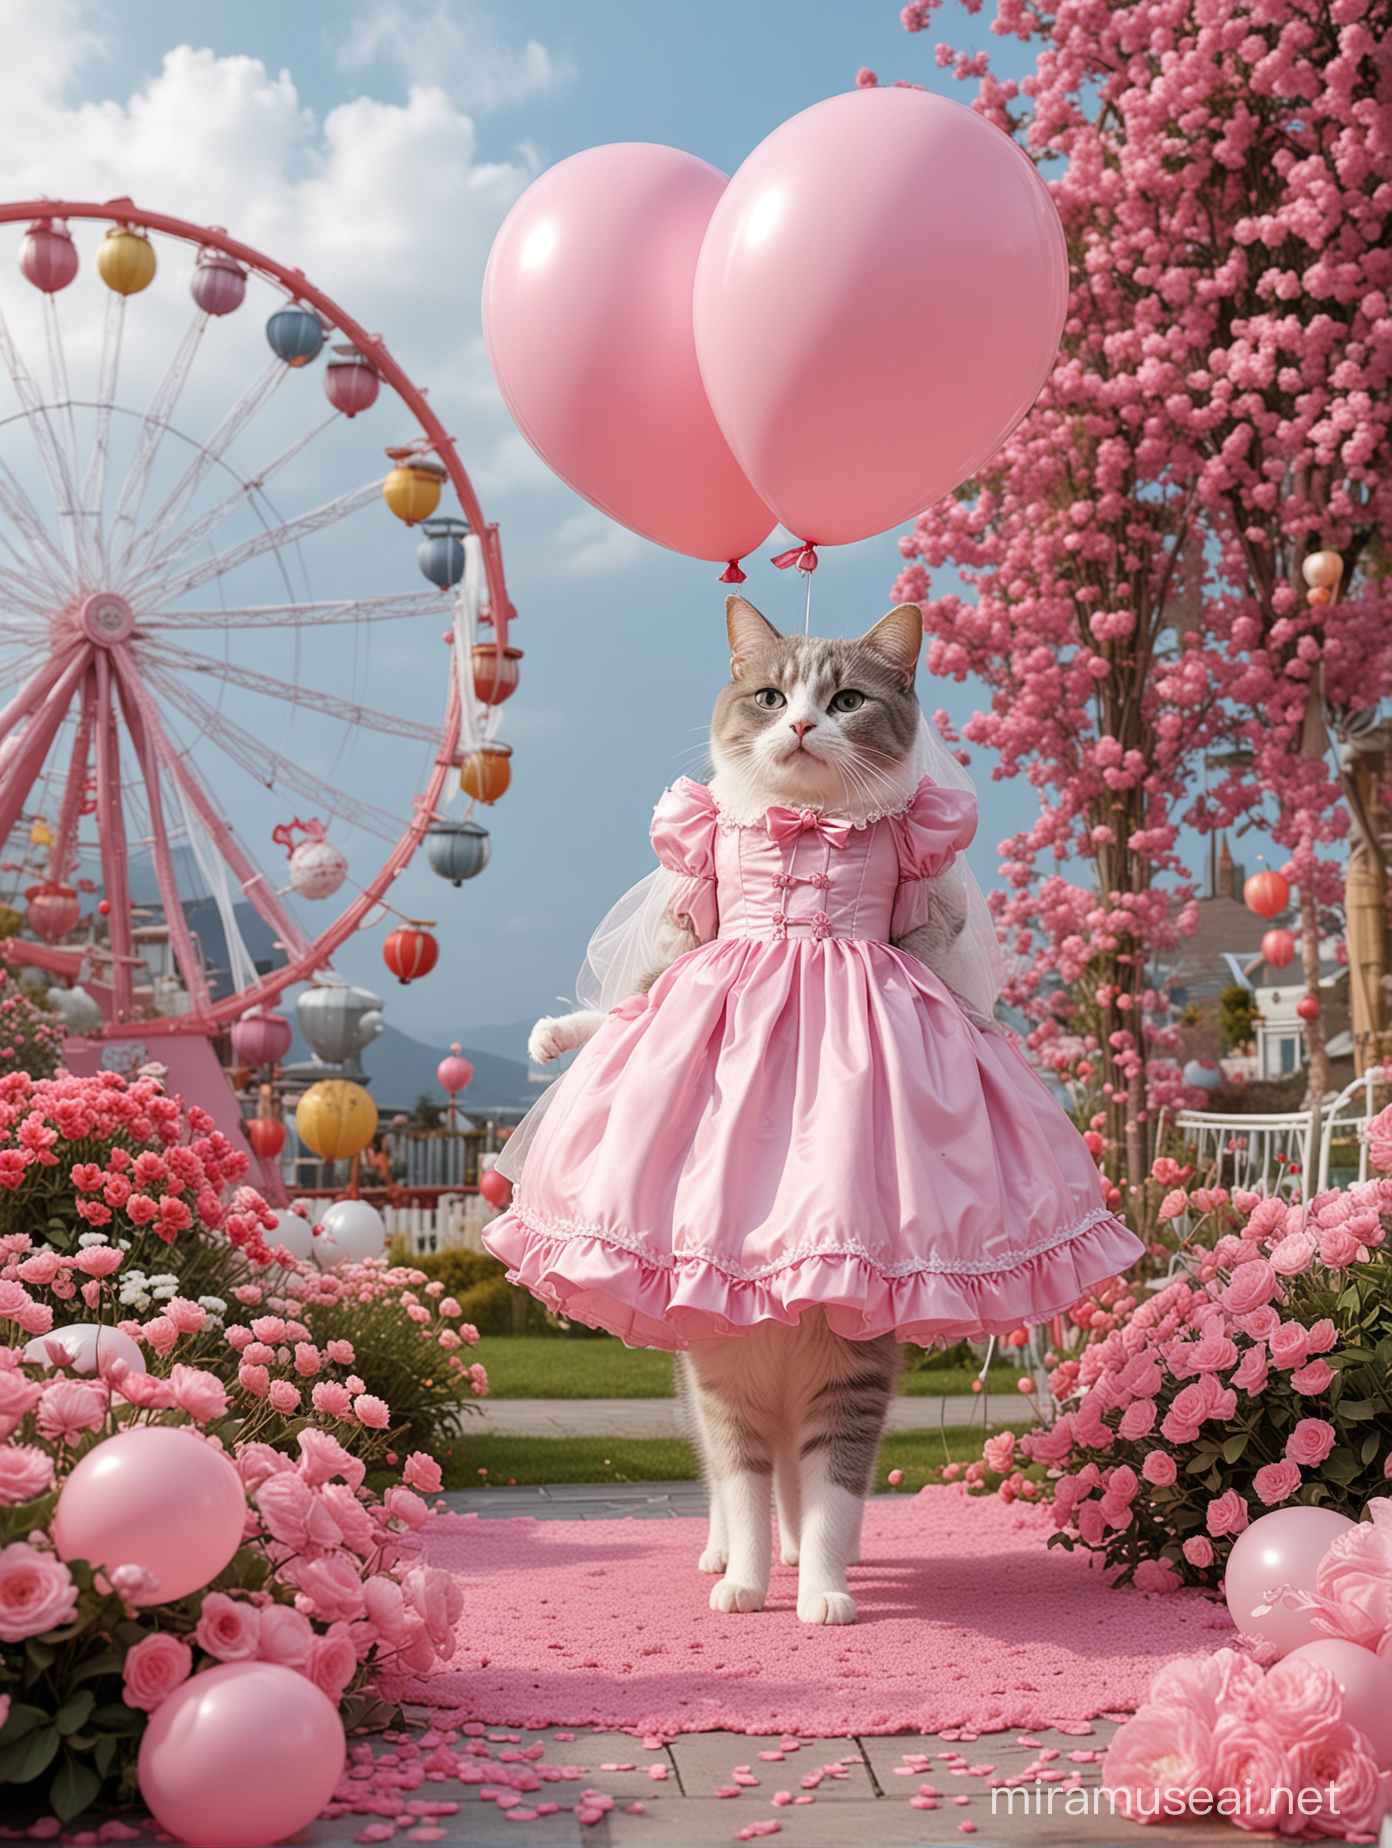 Romantic Proposal Scene with Grey and White Maine Cat in Pink Lolita Dress